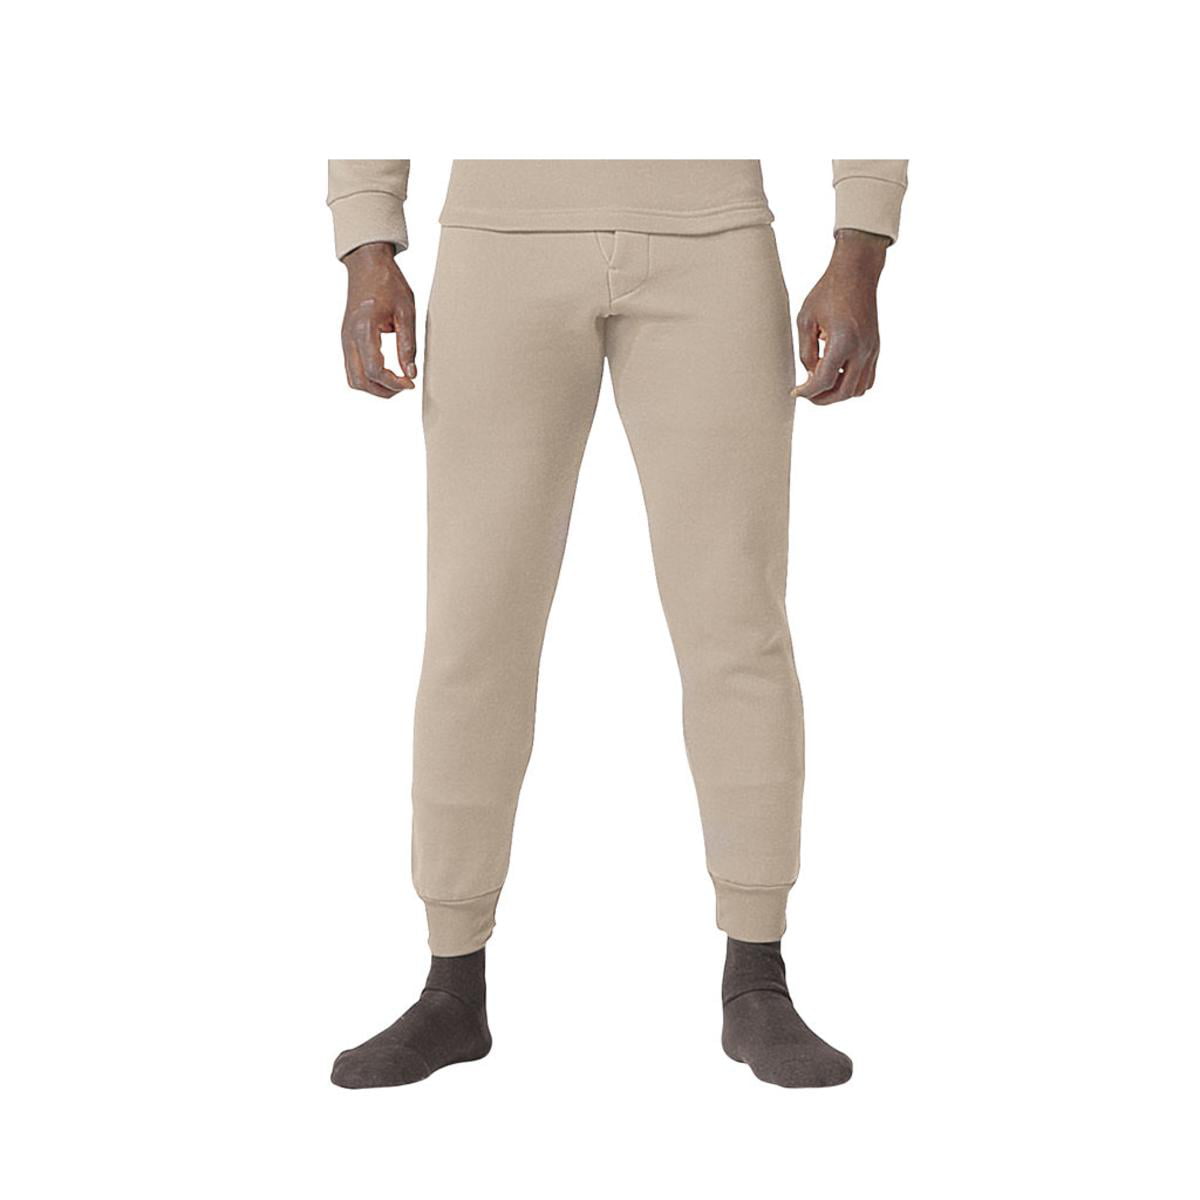 trousers polypro snow LARGE military extreme cold polypropolyne pants drawers 